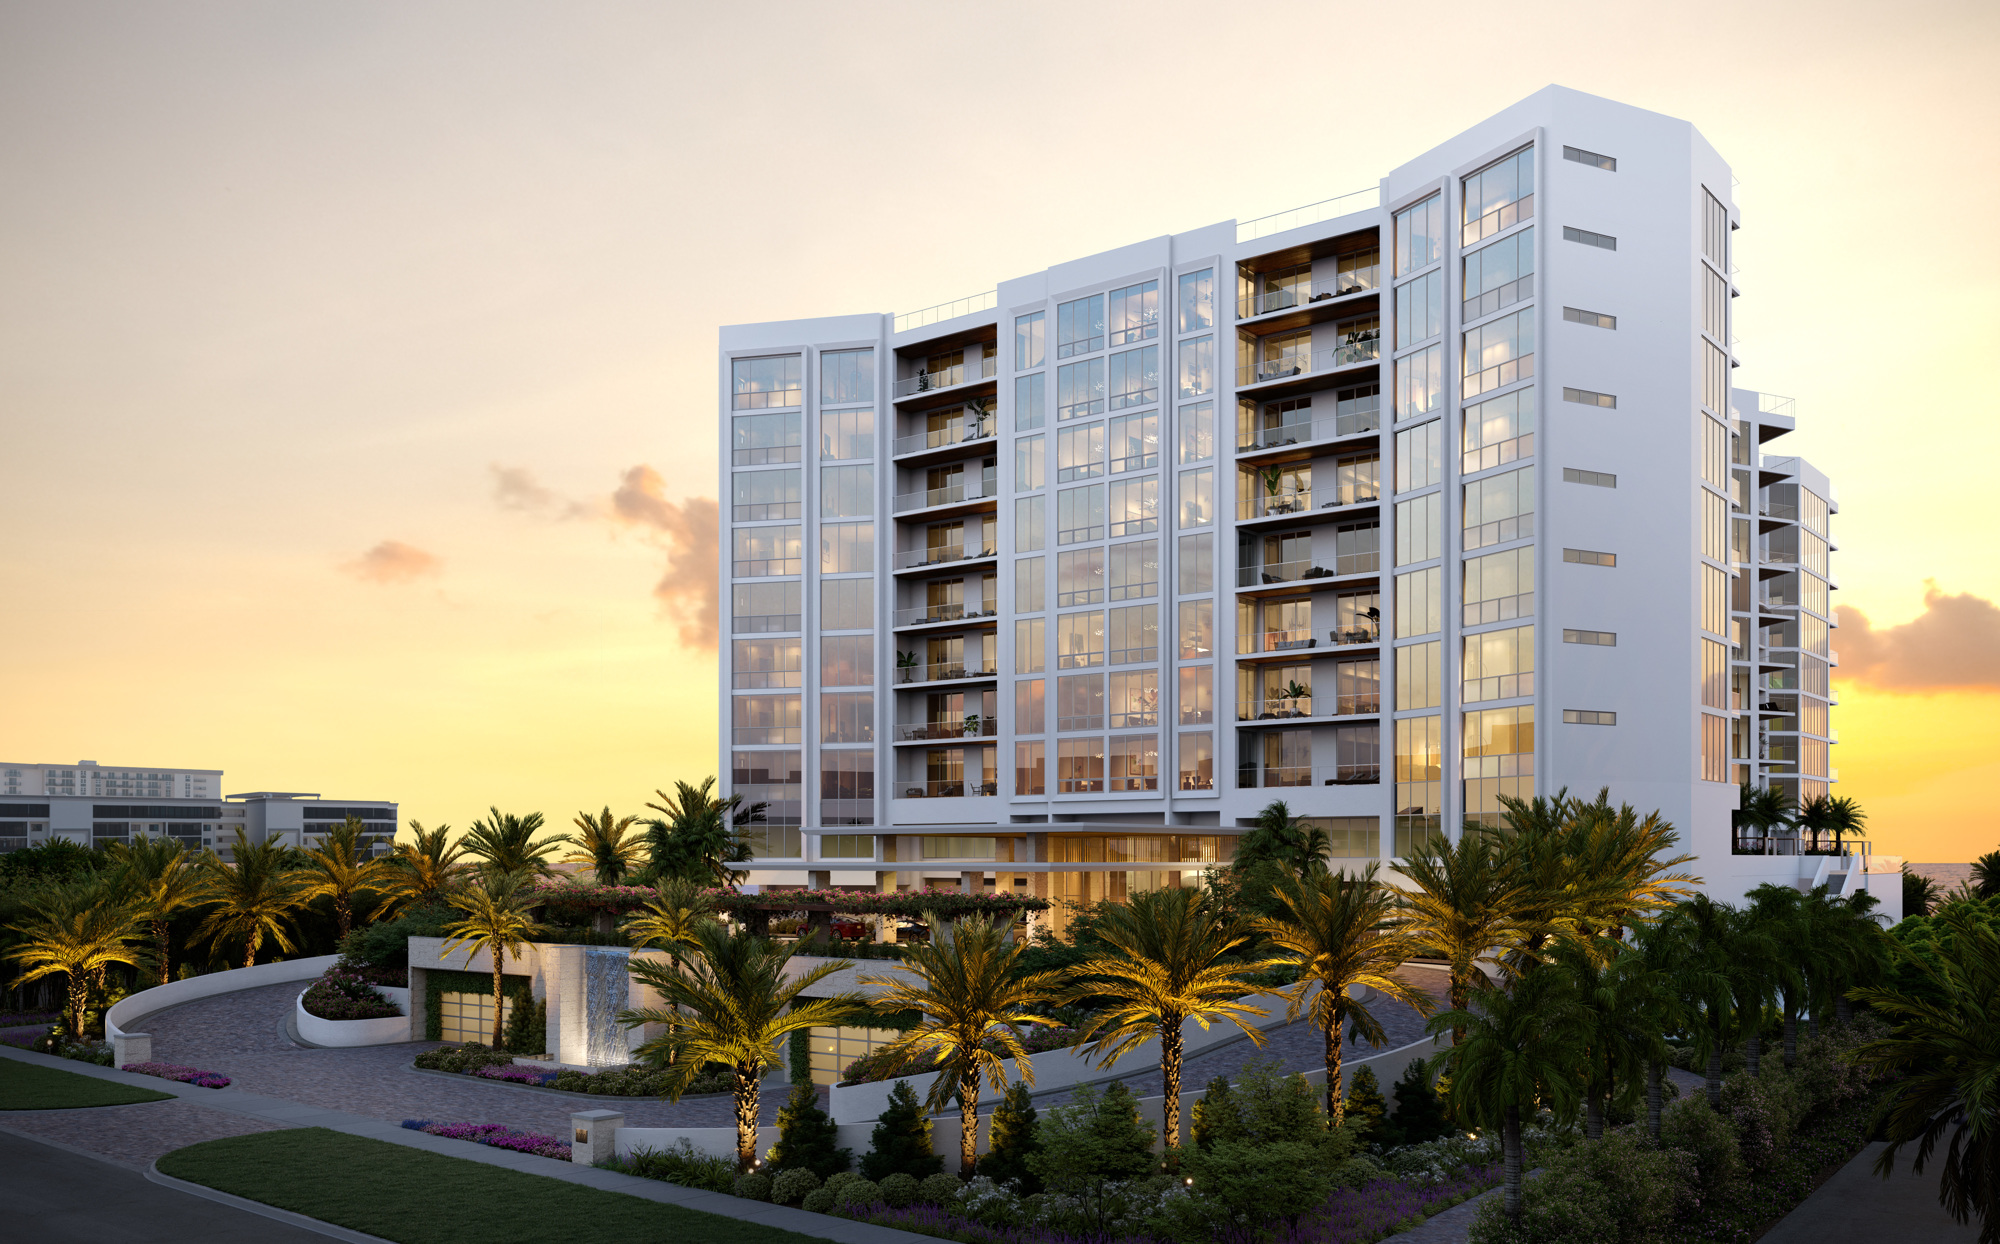 Rosewood Residences Lido Key offers a host of exclusive amenities, including a private restaurant and chef services, private training and yoga sessions and a 24-hour concierge. (Courtesy photo)